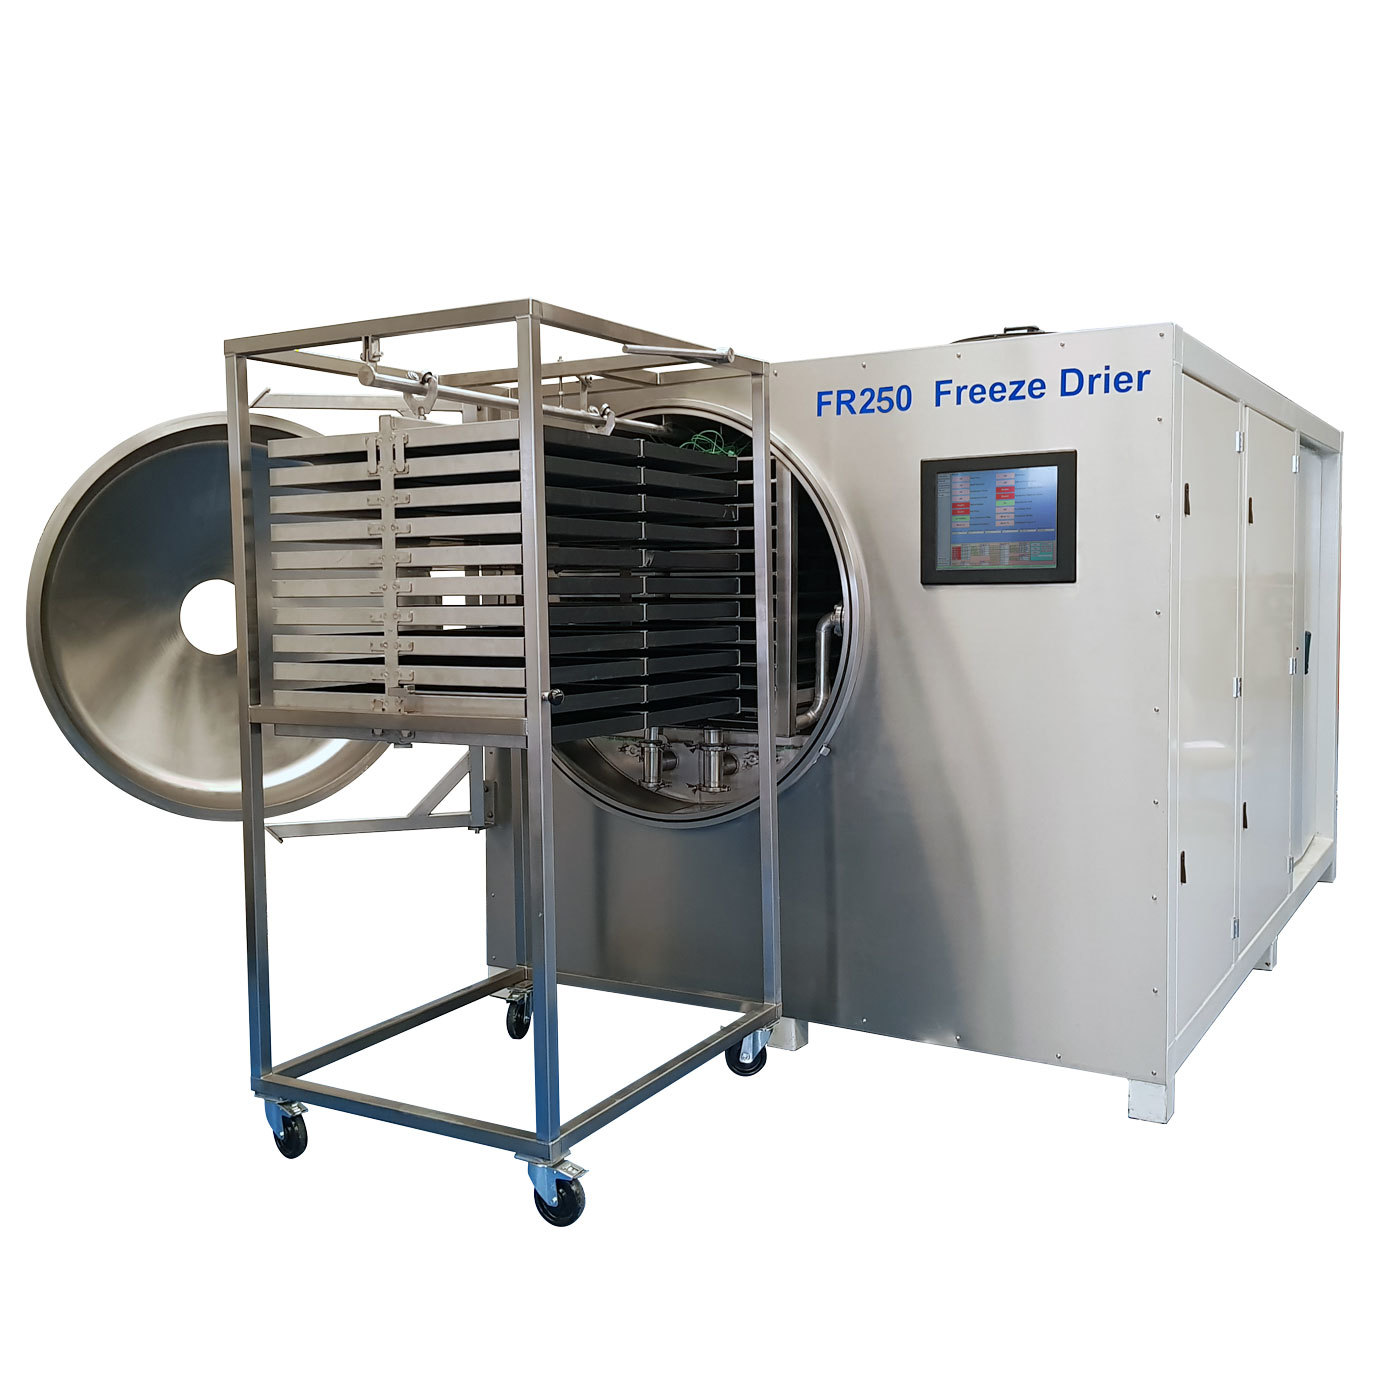 FR100 freeze drier with product loading trolley